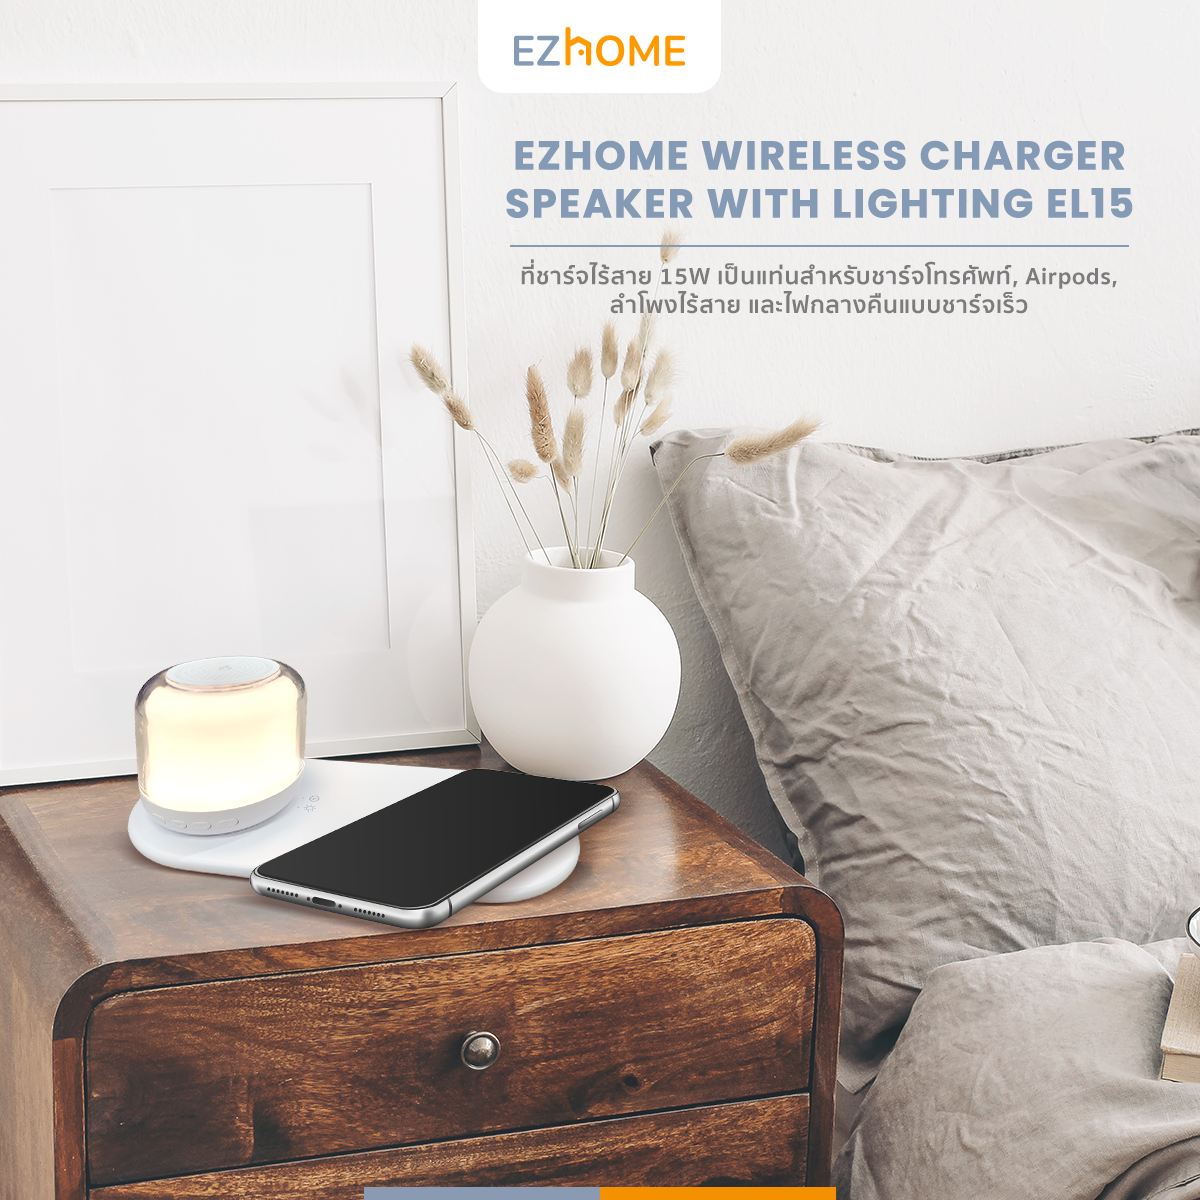 EZhome wireless charger speaker with lighting EL15